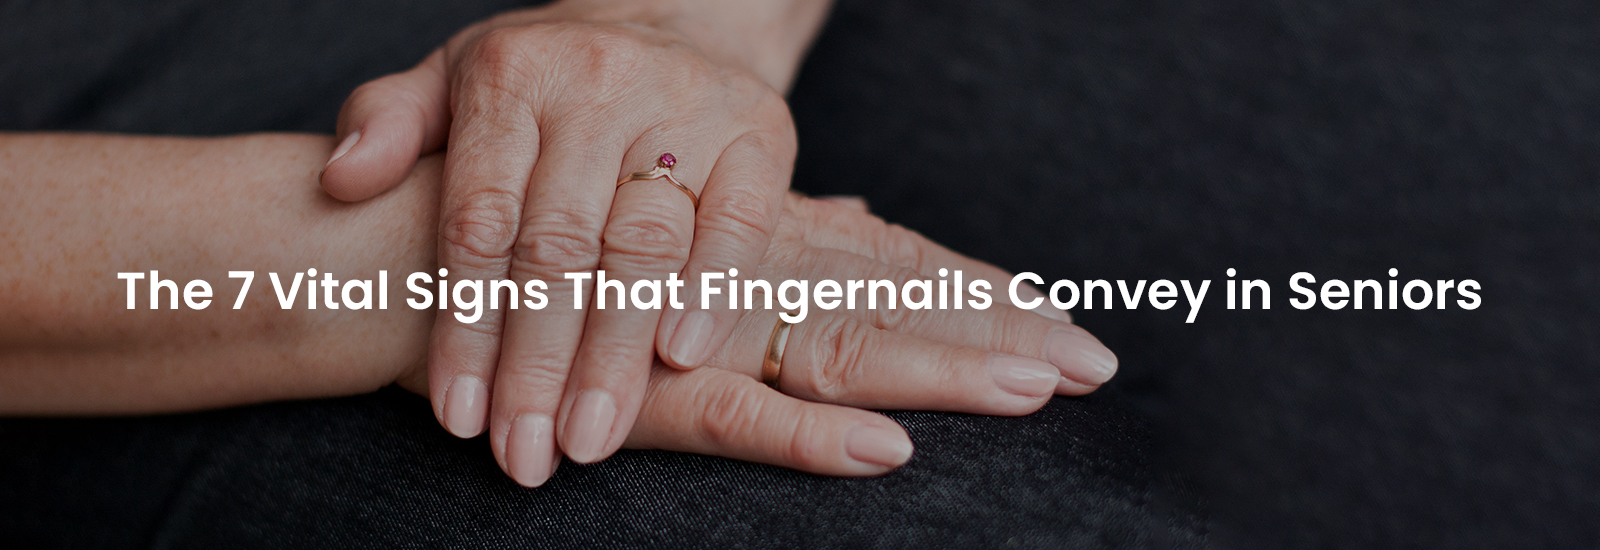 The 7 Vital Signs that Fingernails Convey in Seniors | Banner Image